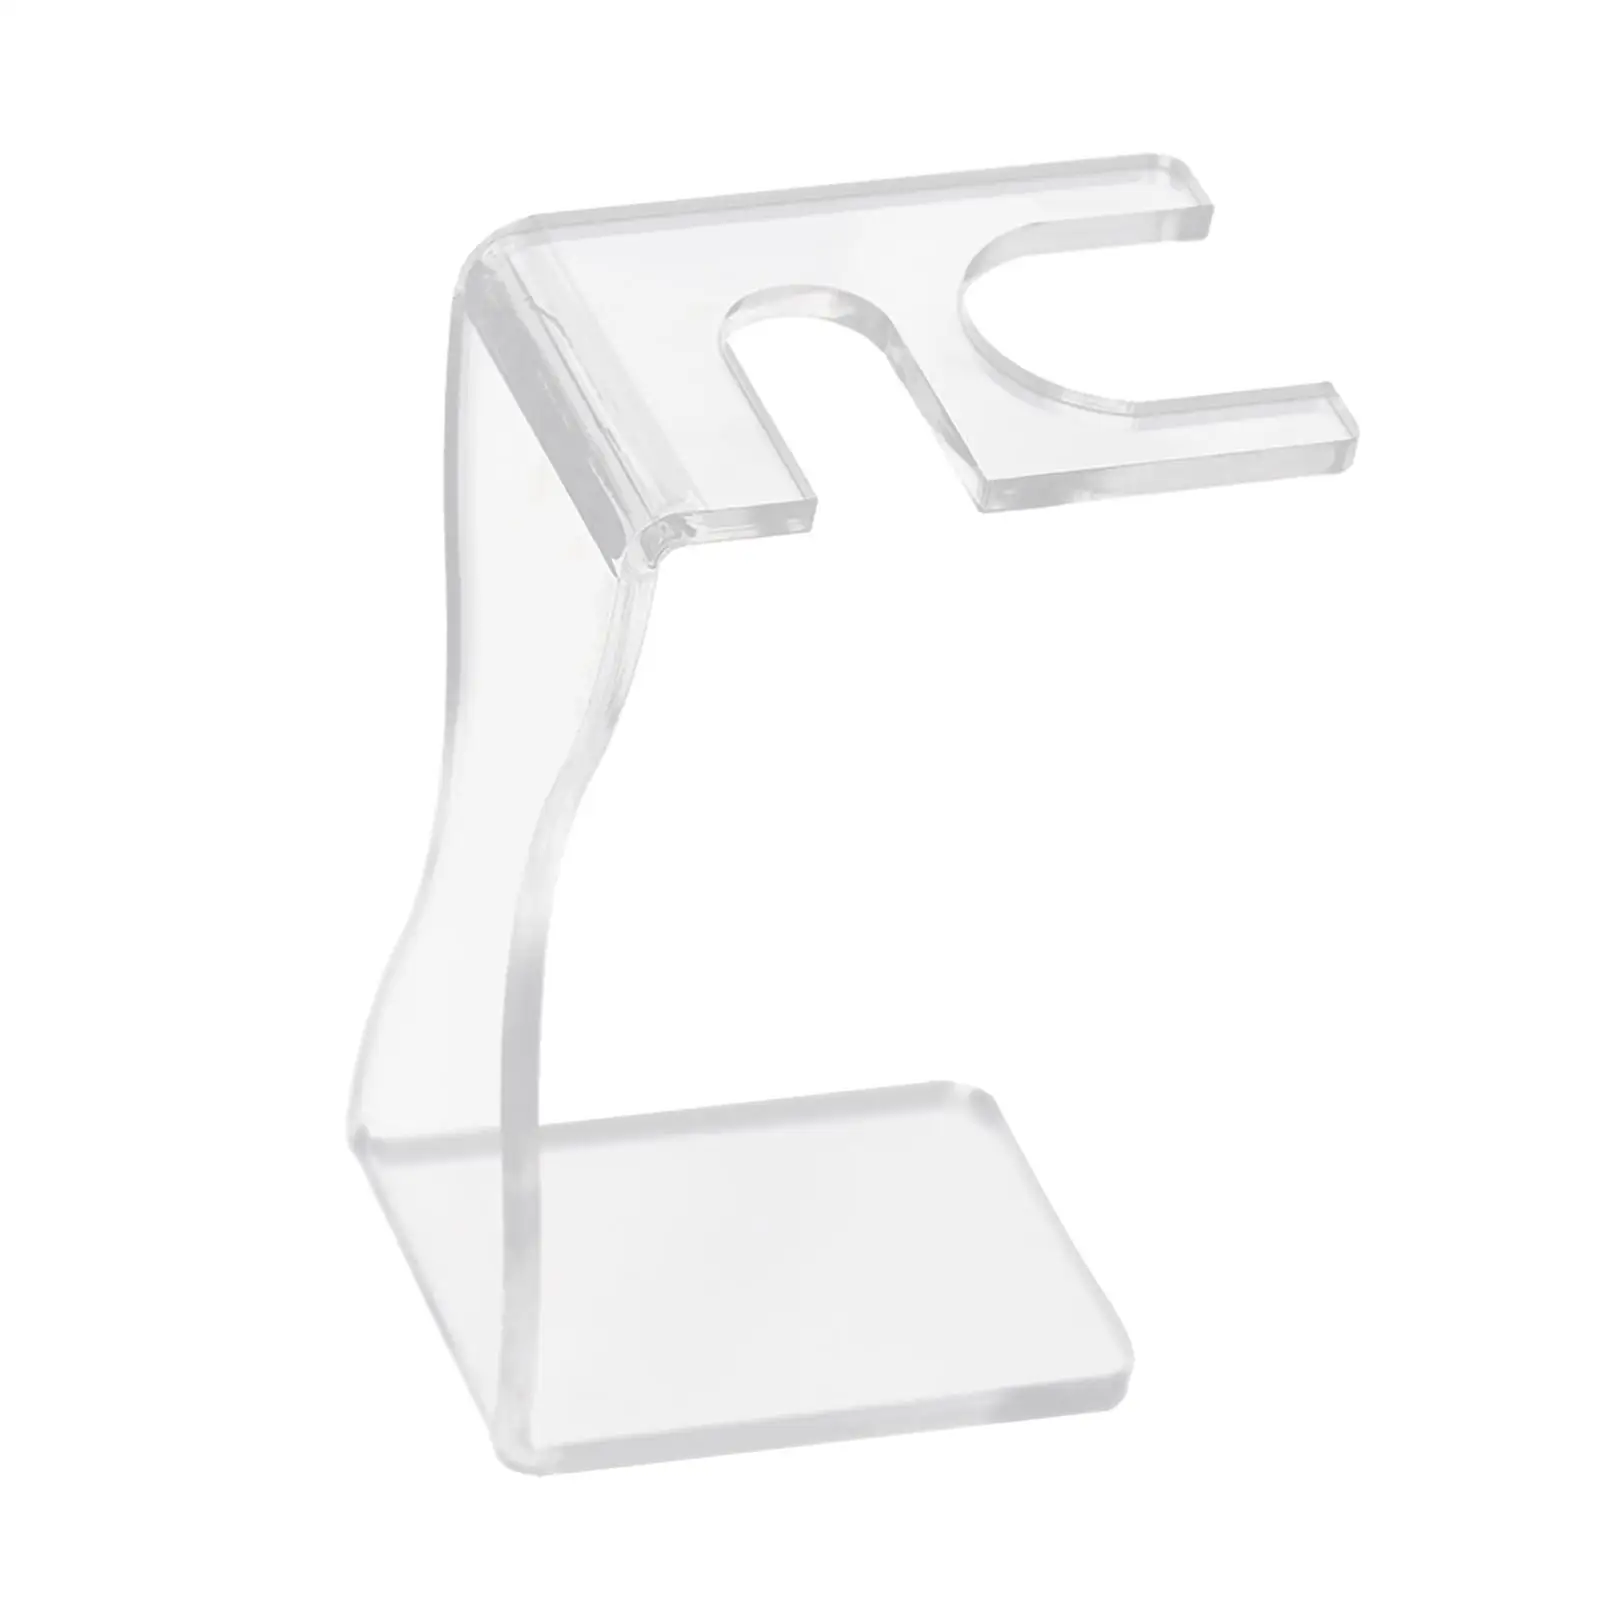 Manual Shaver Stand Holder Rack Transparent for Protecting and Drying Shaver